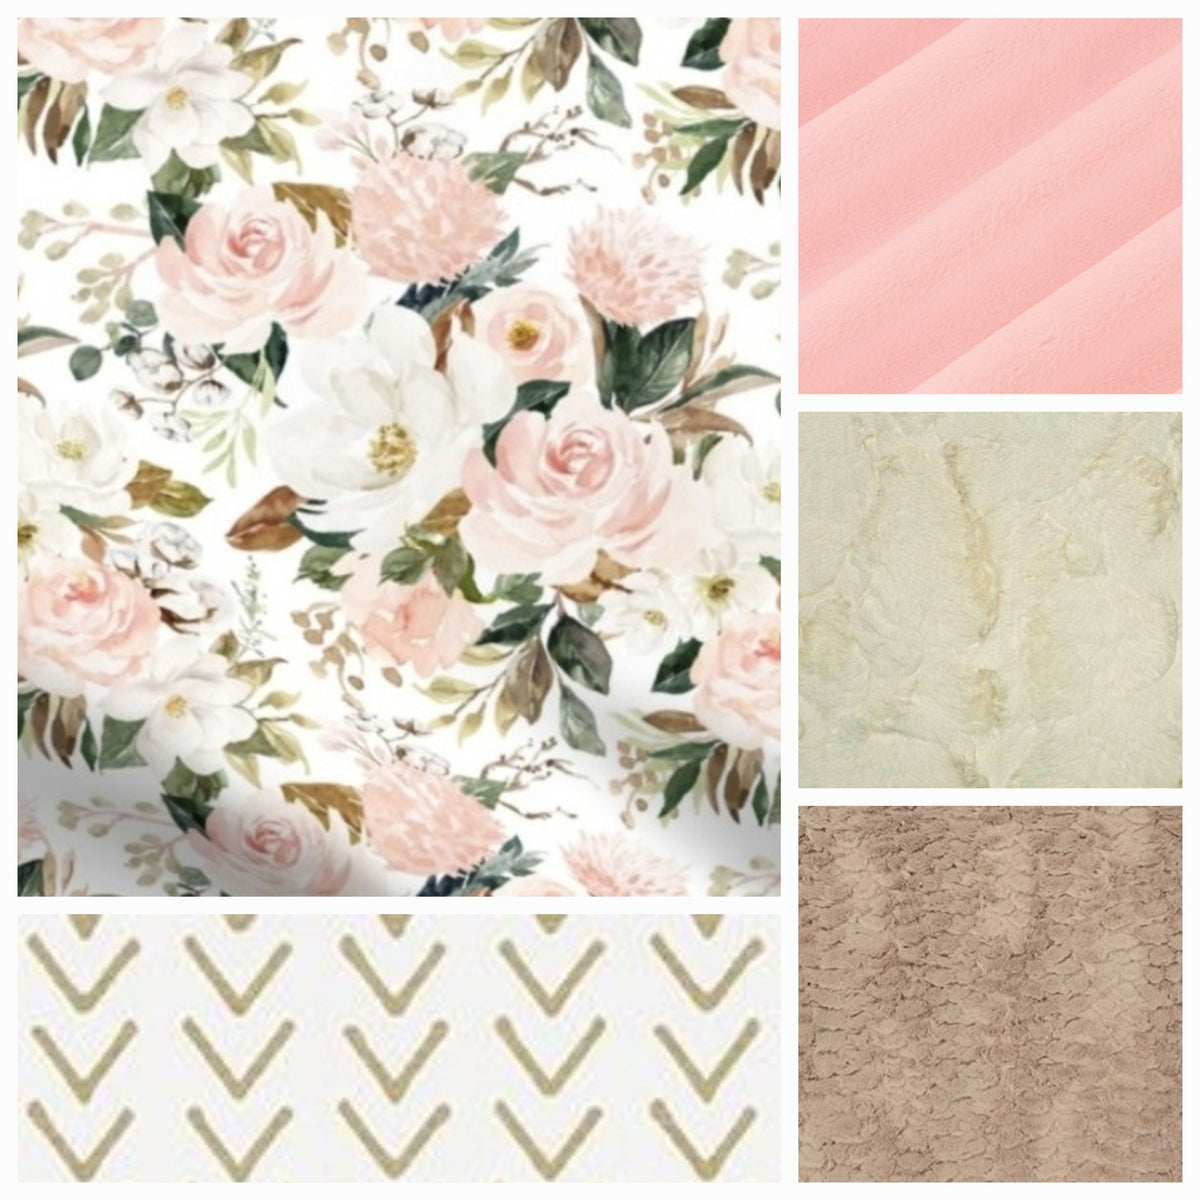 New Release Girl Crib Bedding- Rose and Magnolia Floral Baby Bedding &amp; Nursery Collection - DBC Baby Bedding Co 